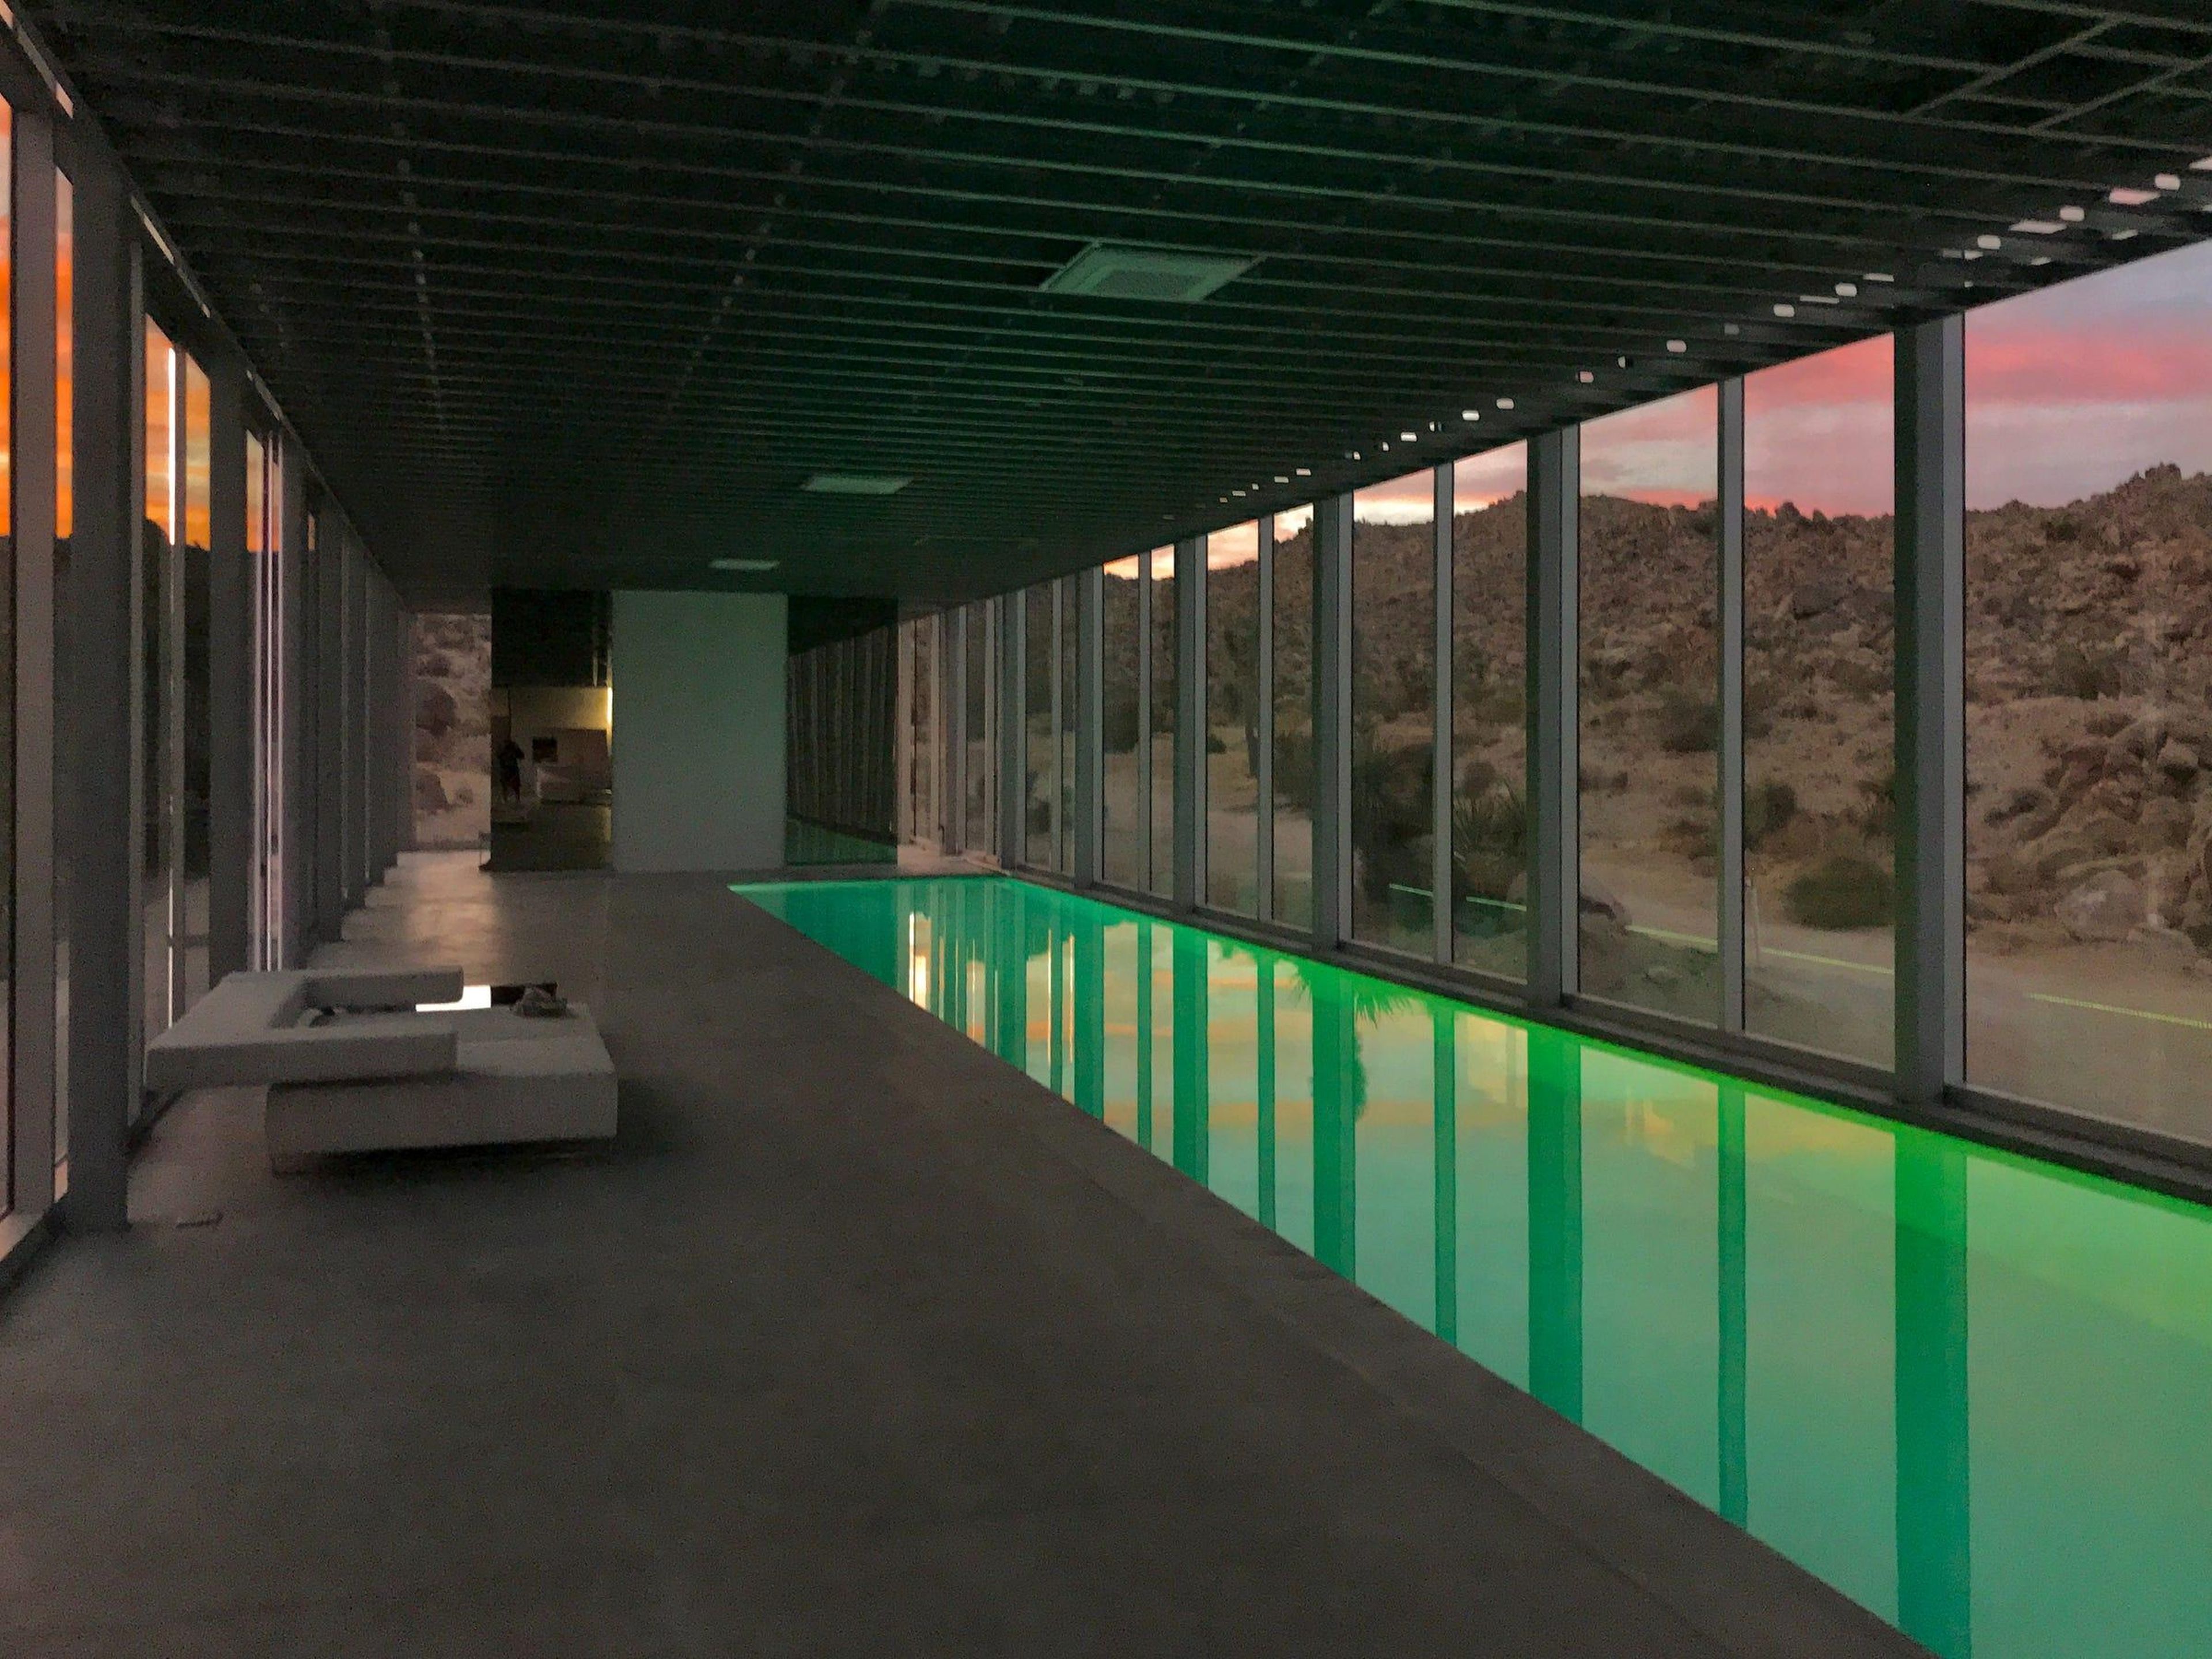 Hanley told Business Insider that one of his favorite details about the home is when the changing light outside integrates with the pool lights, which shift between blue, red, green, turquoise, and violet.